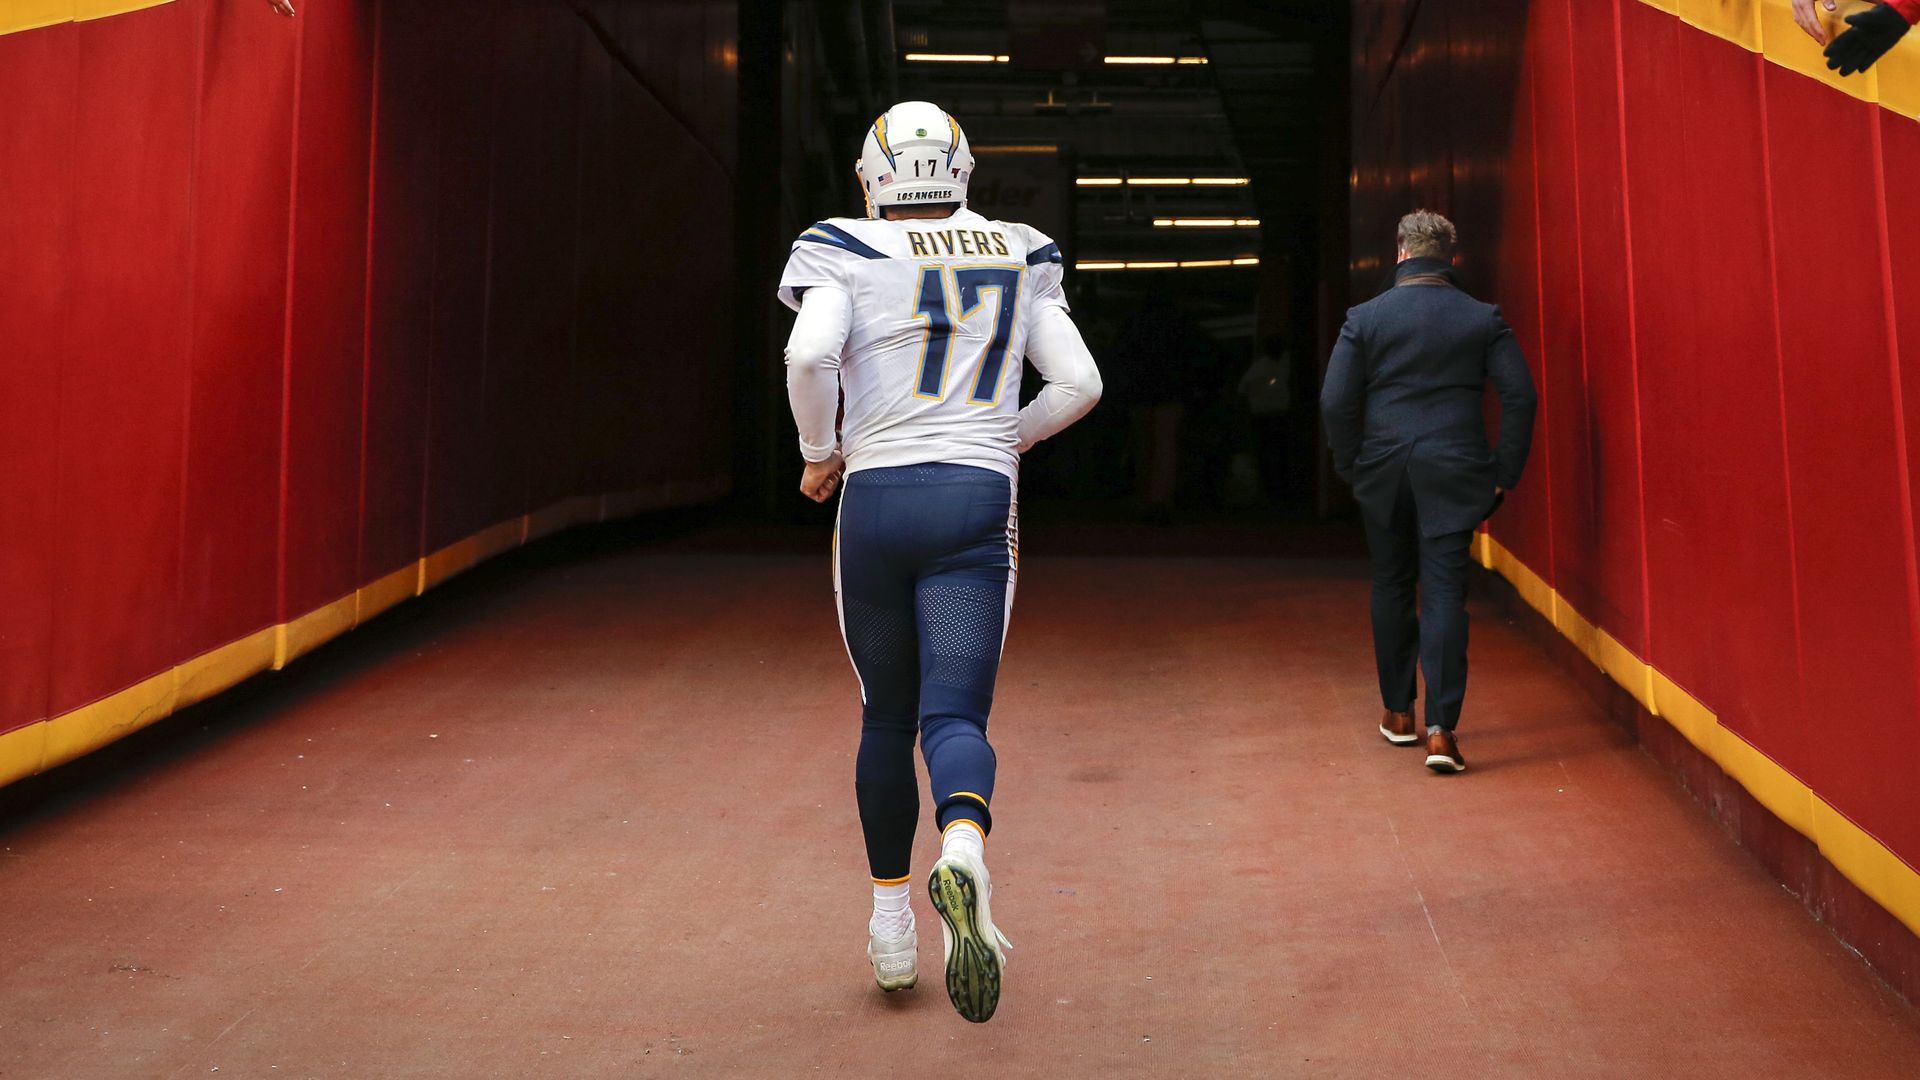 Philip Rivers exits the field